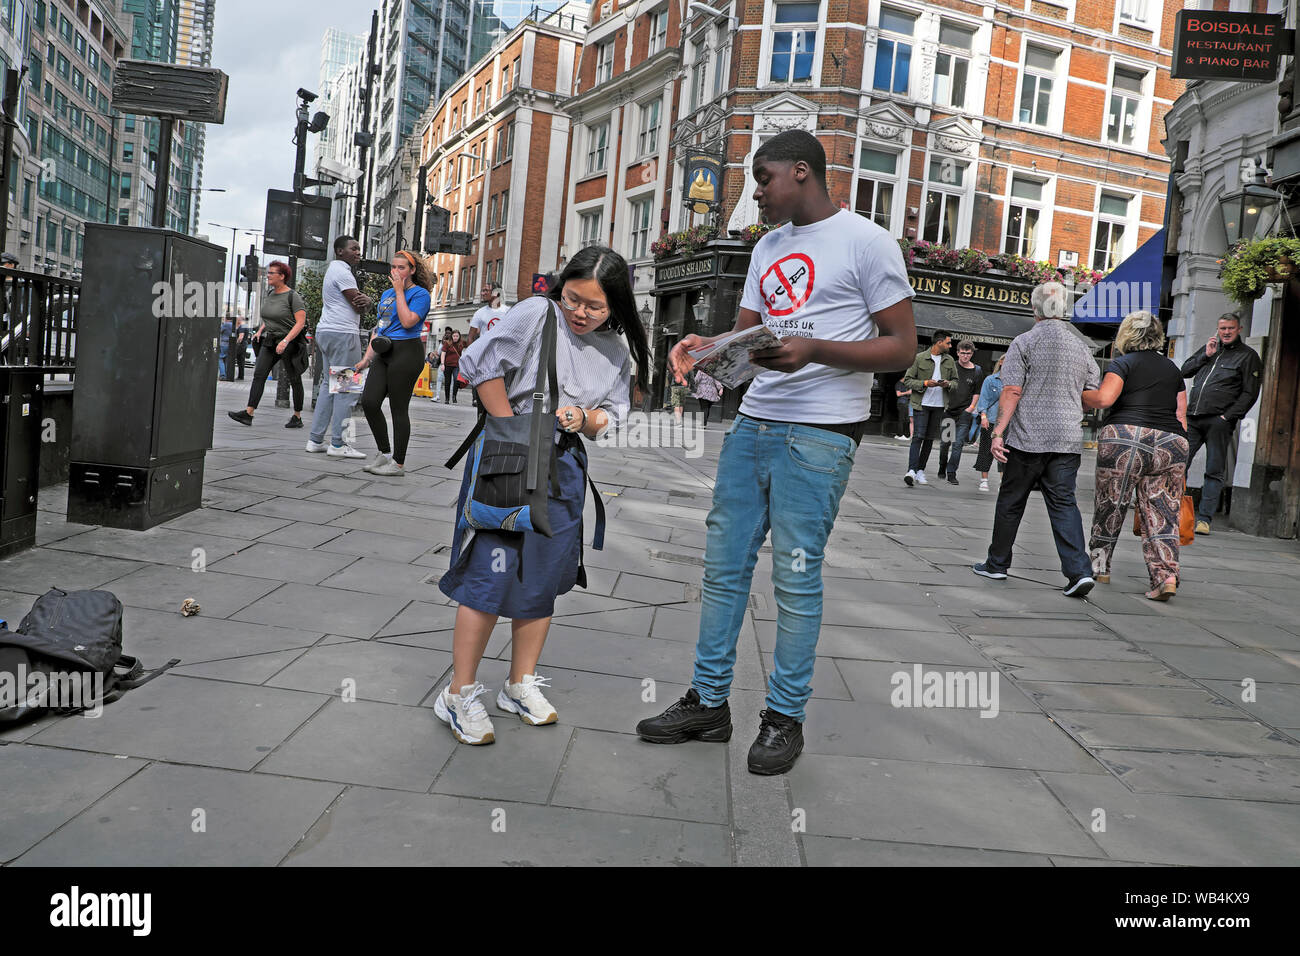 Young woman reaching for purse in handbag to make donation to young man fundraising for education in Liverpool Street London England UK  KATHY DEWITT Stock Photo